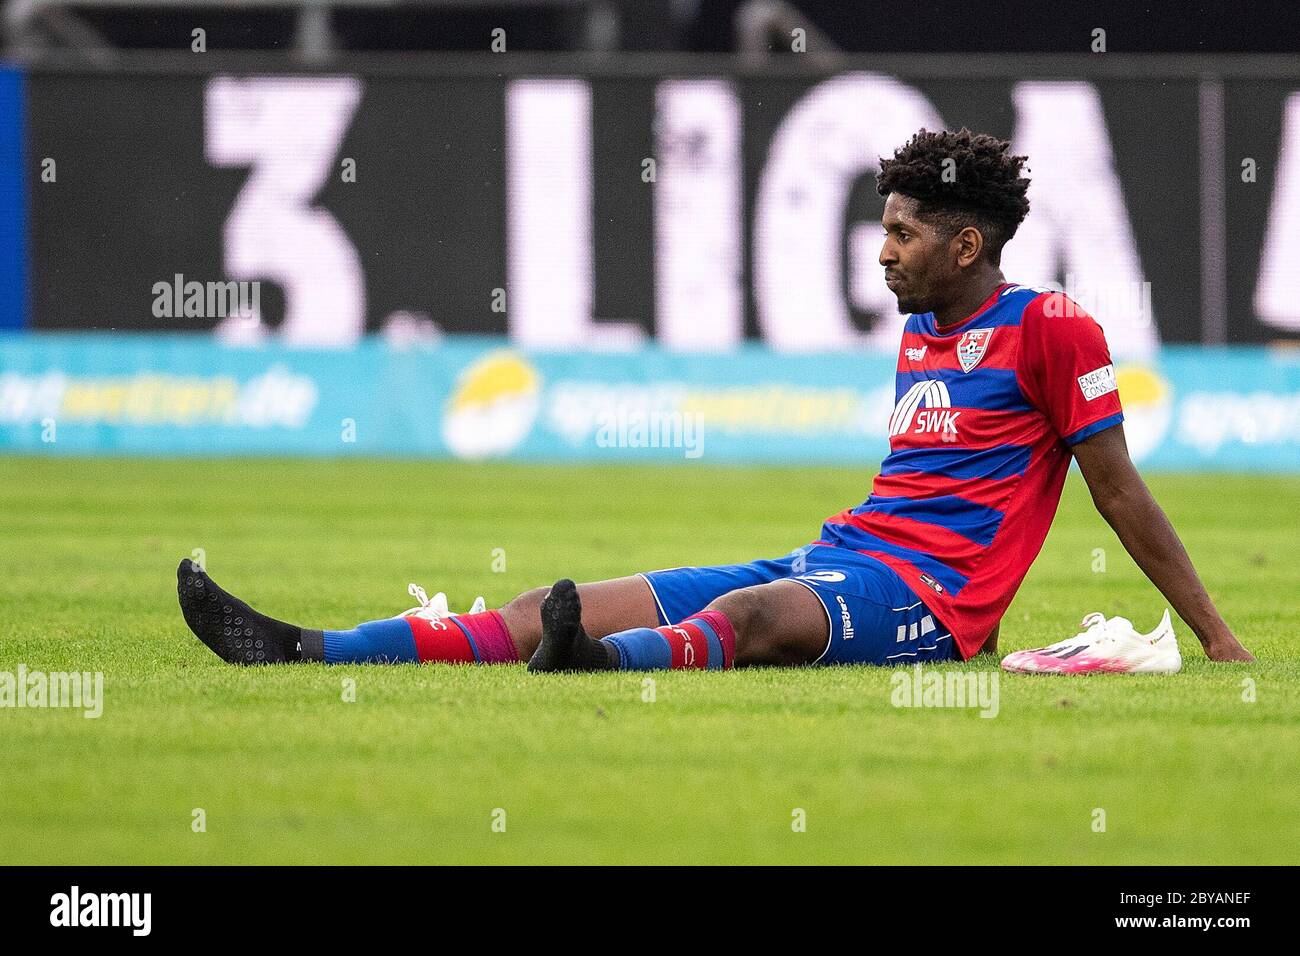 Duesseldorf, Germany. 09th June, 2020. Football: 3rd division, KFC Uerdingen - TSV 1860 Munich, 31st day of play in the Merkur-Spielarena. Uerdingen's Boubacar Barry sits on the grass after the game. Credit: Marius Becker/dpa/Alamy Live News Stock Photo